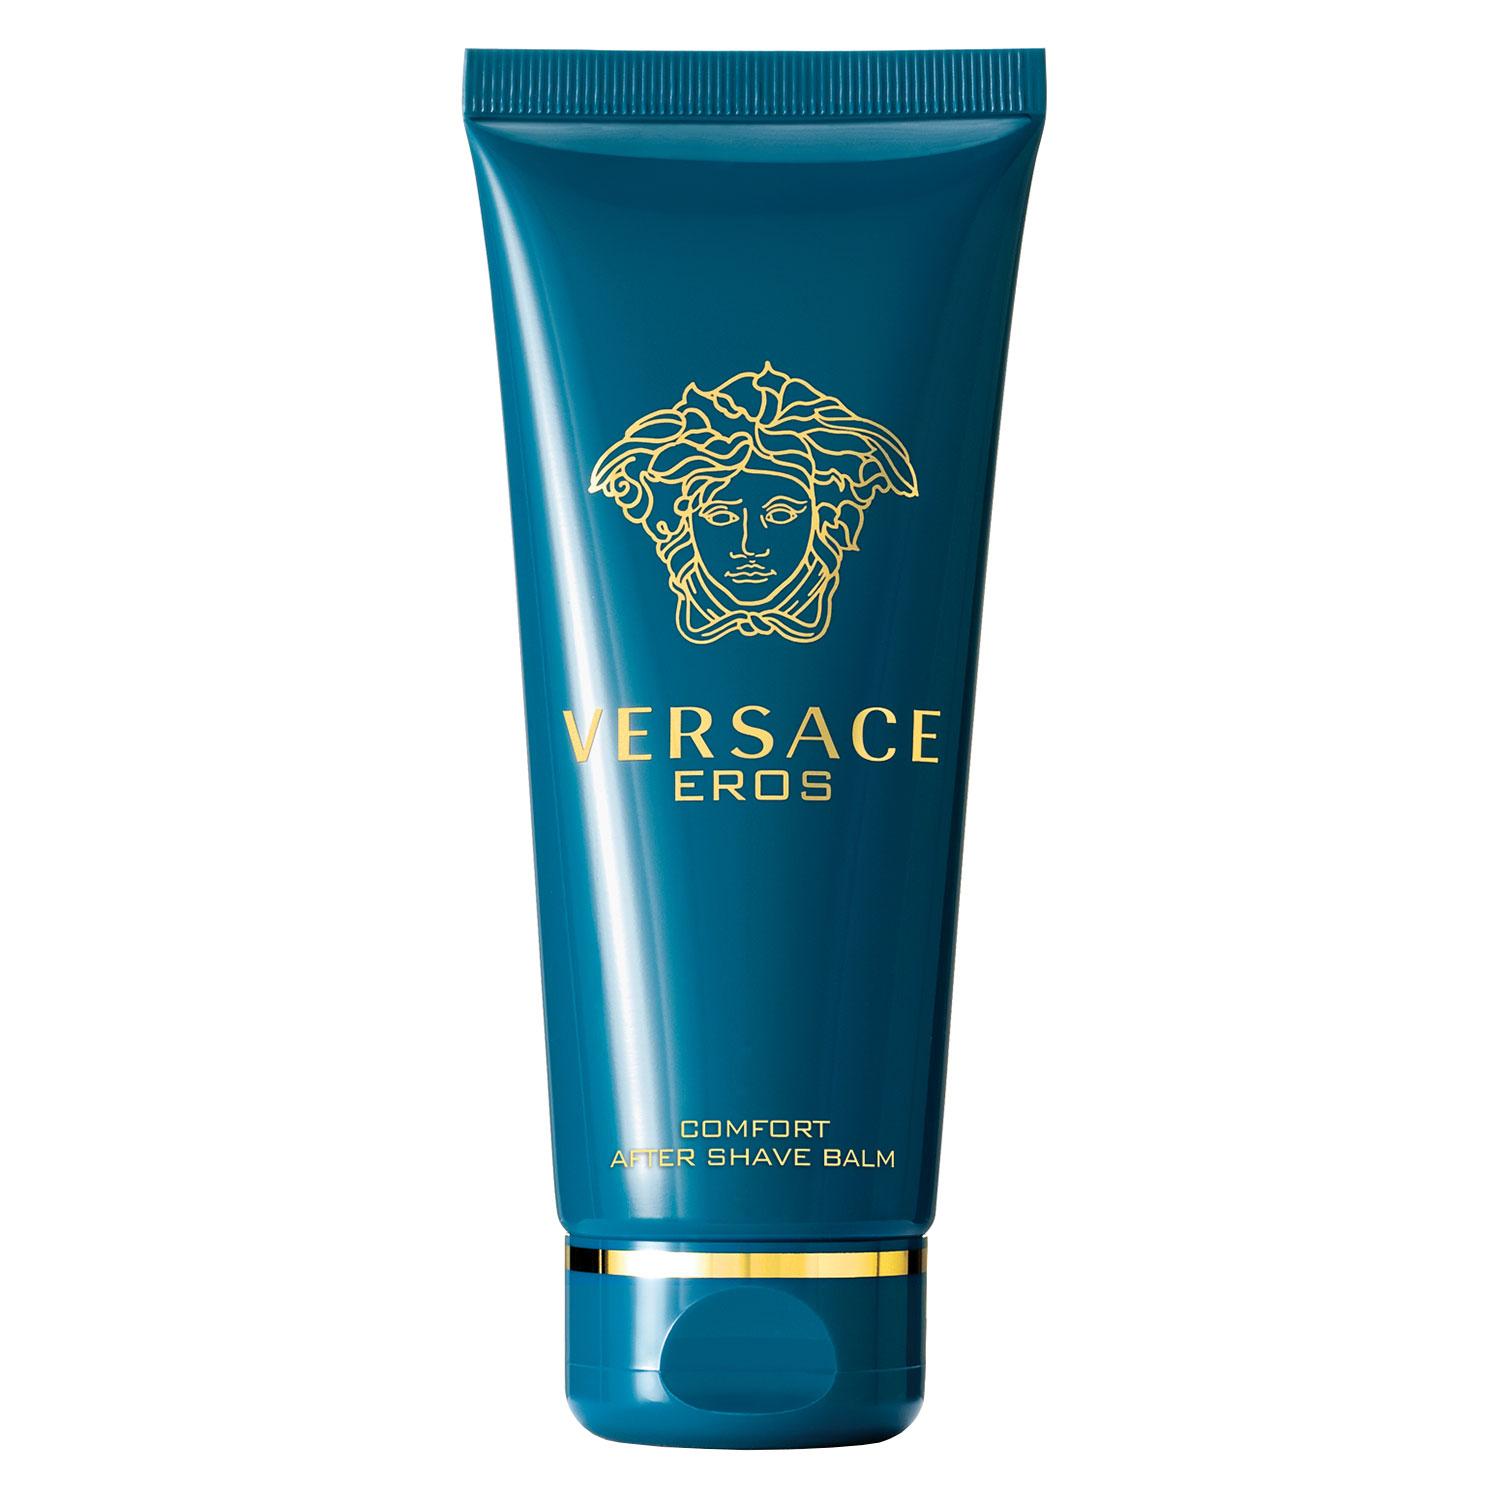 Versace Eros - After Shave Balm